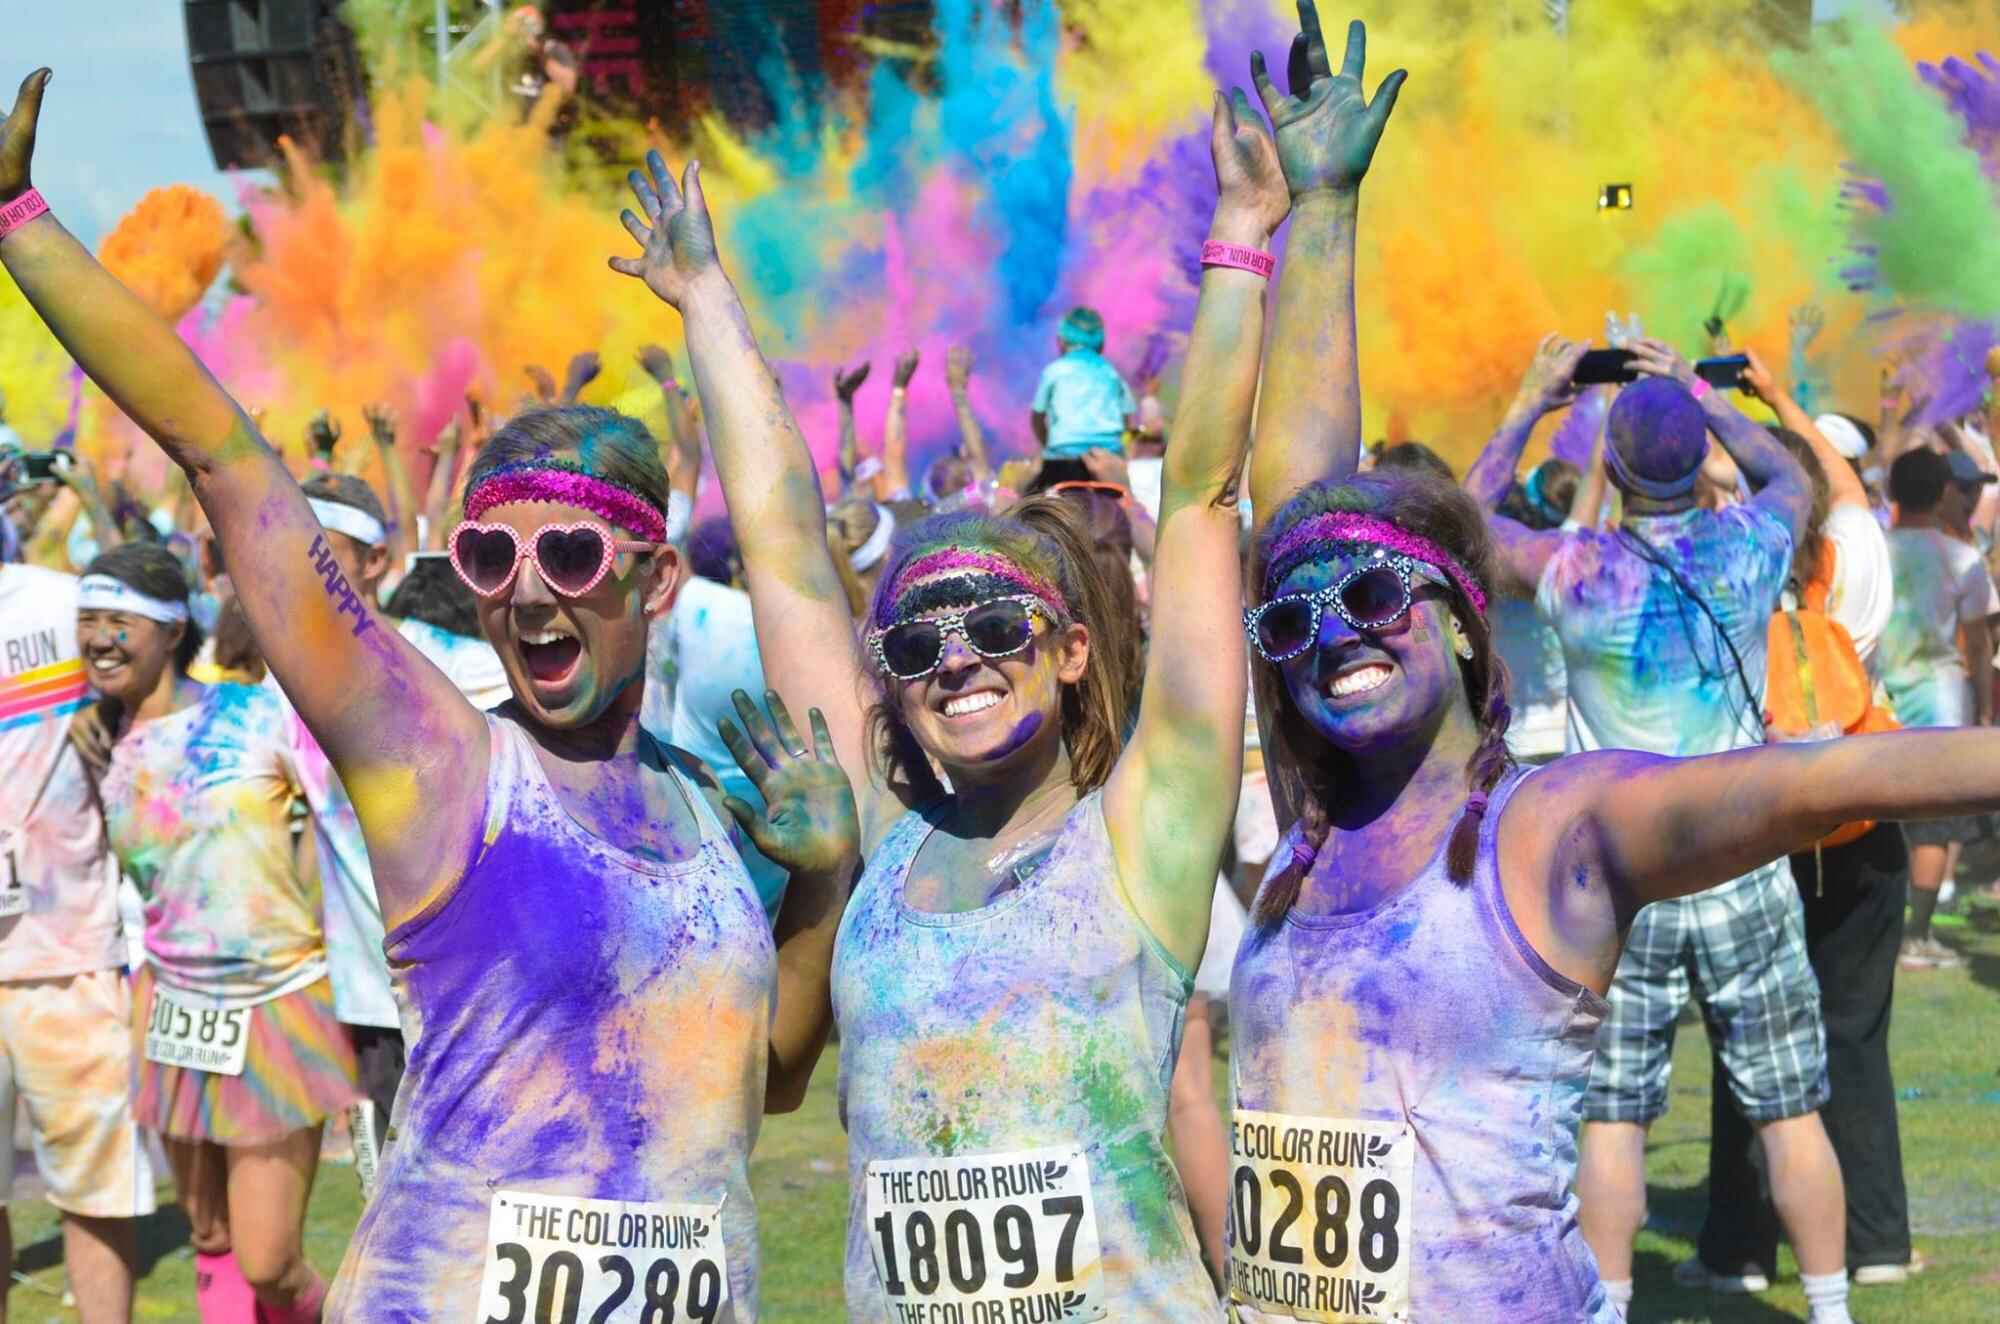 What Is The Color Run 5K?